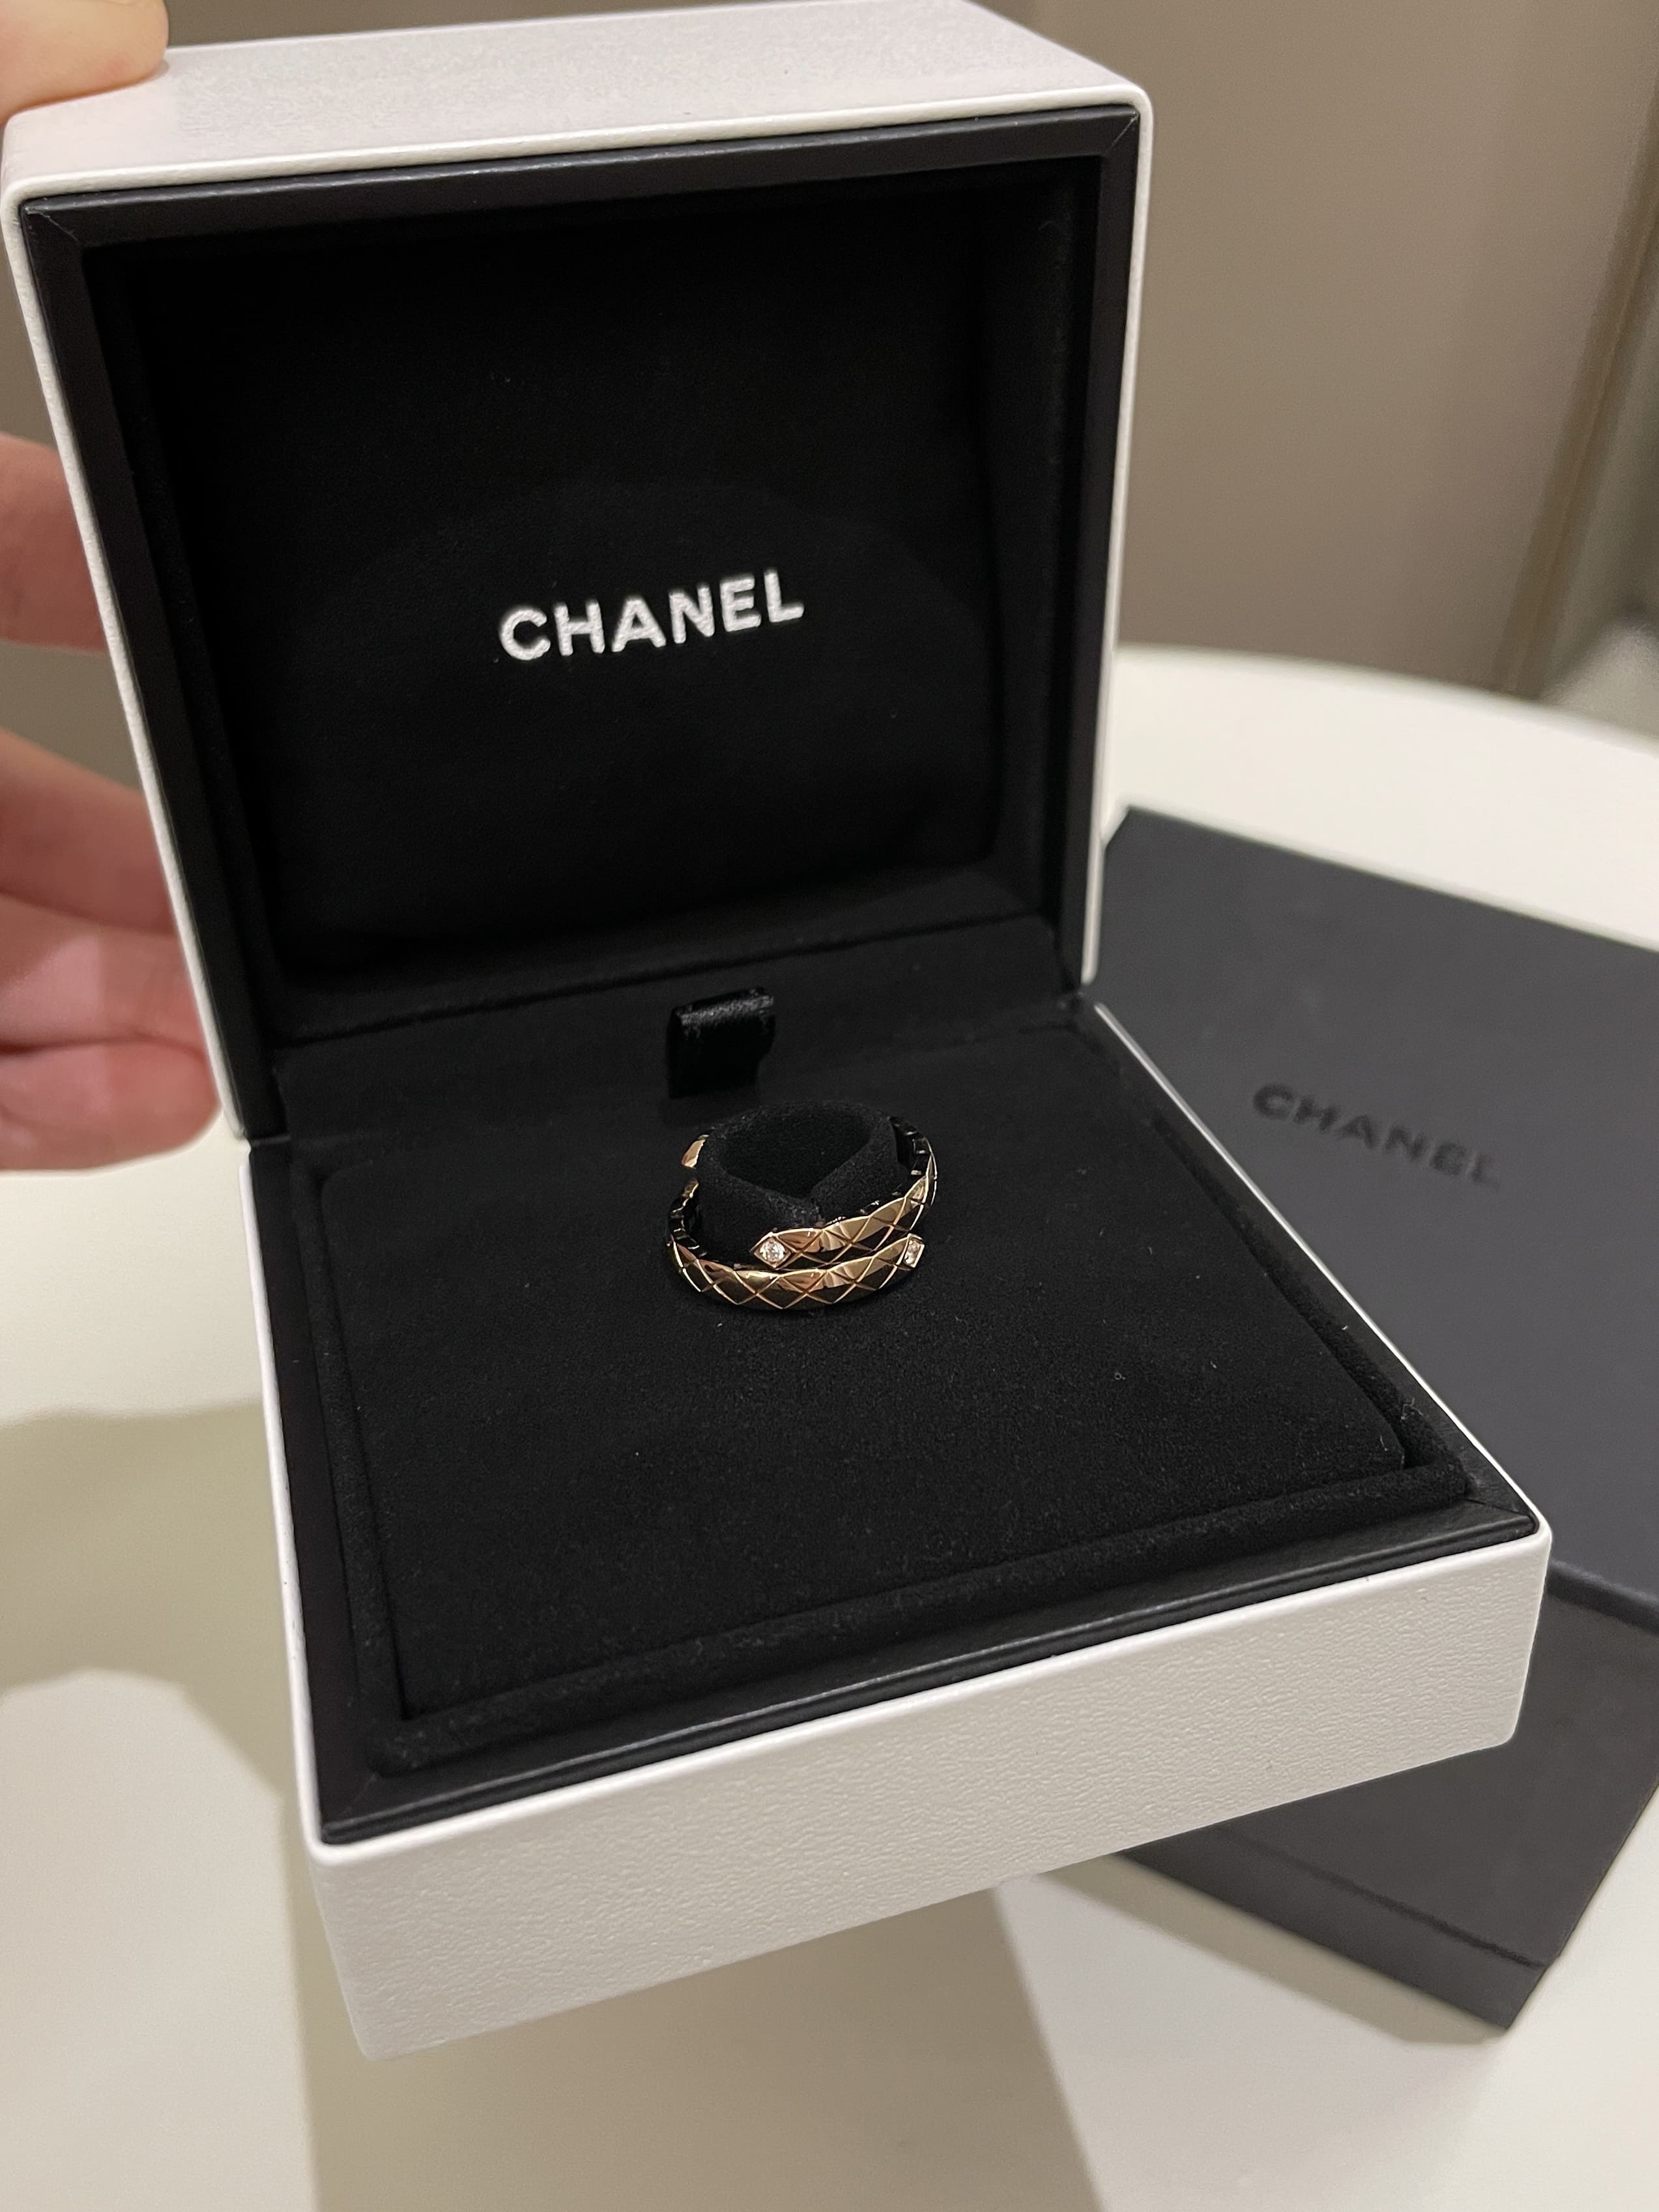 Chanel Crystal Coco Crush Toi Et Moi Ring 18K White & Beige Gold Size 52